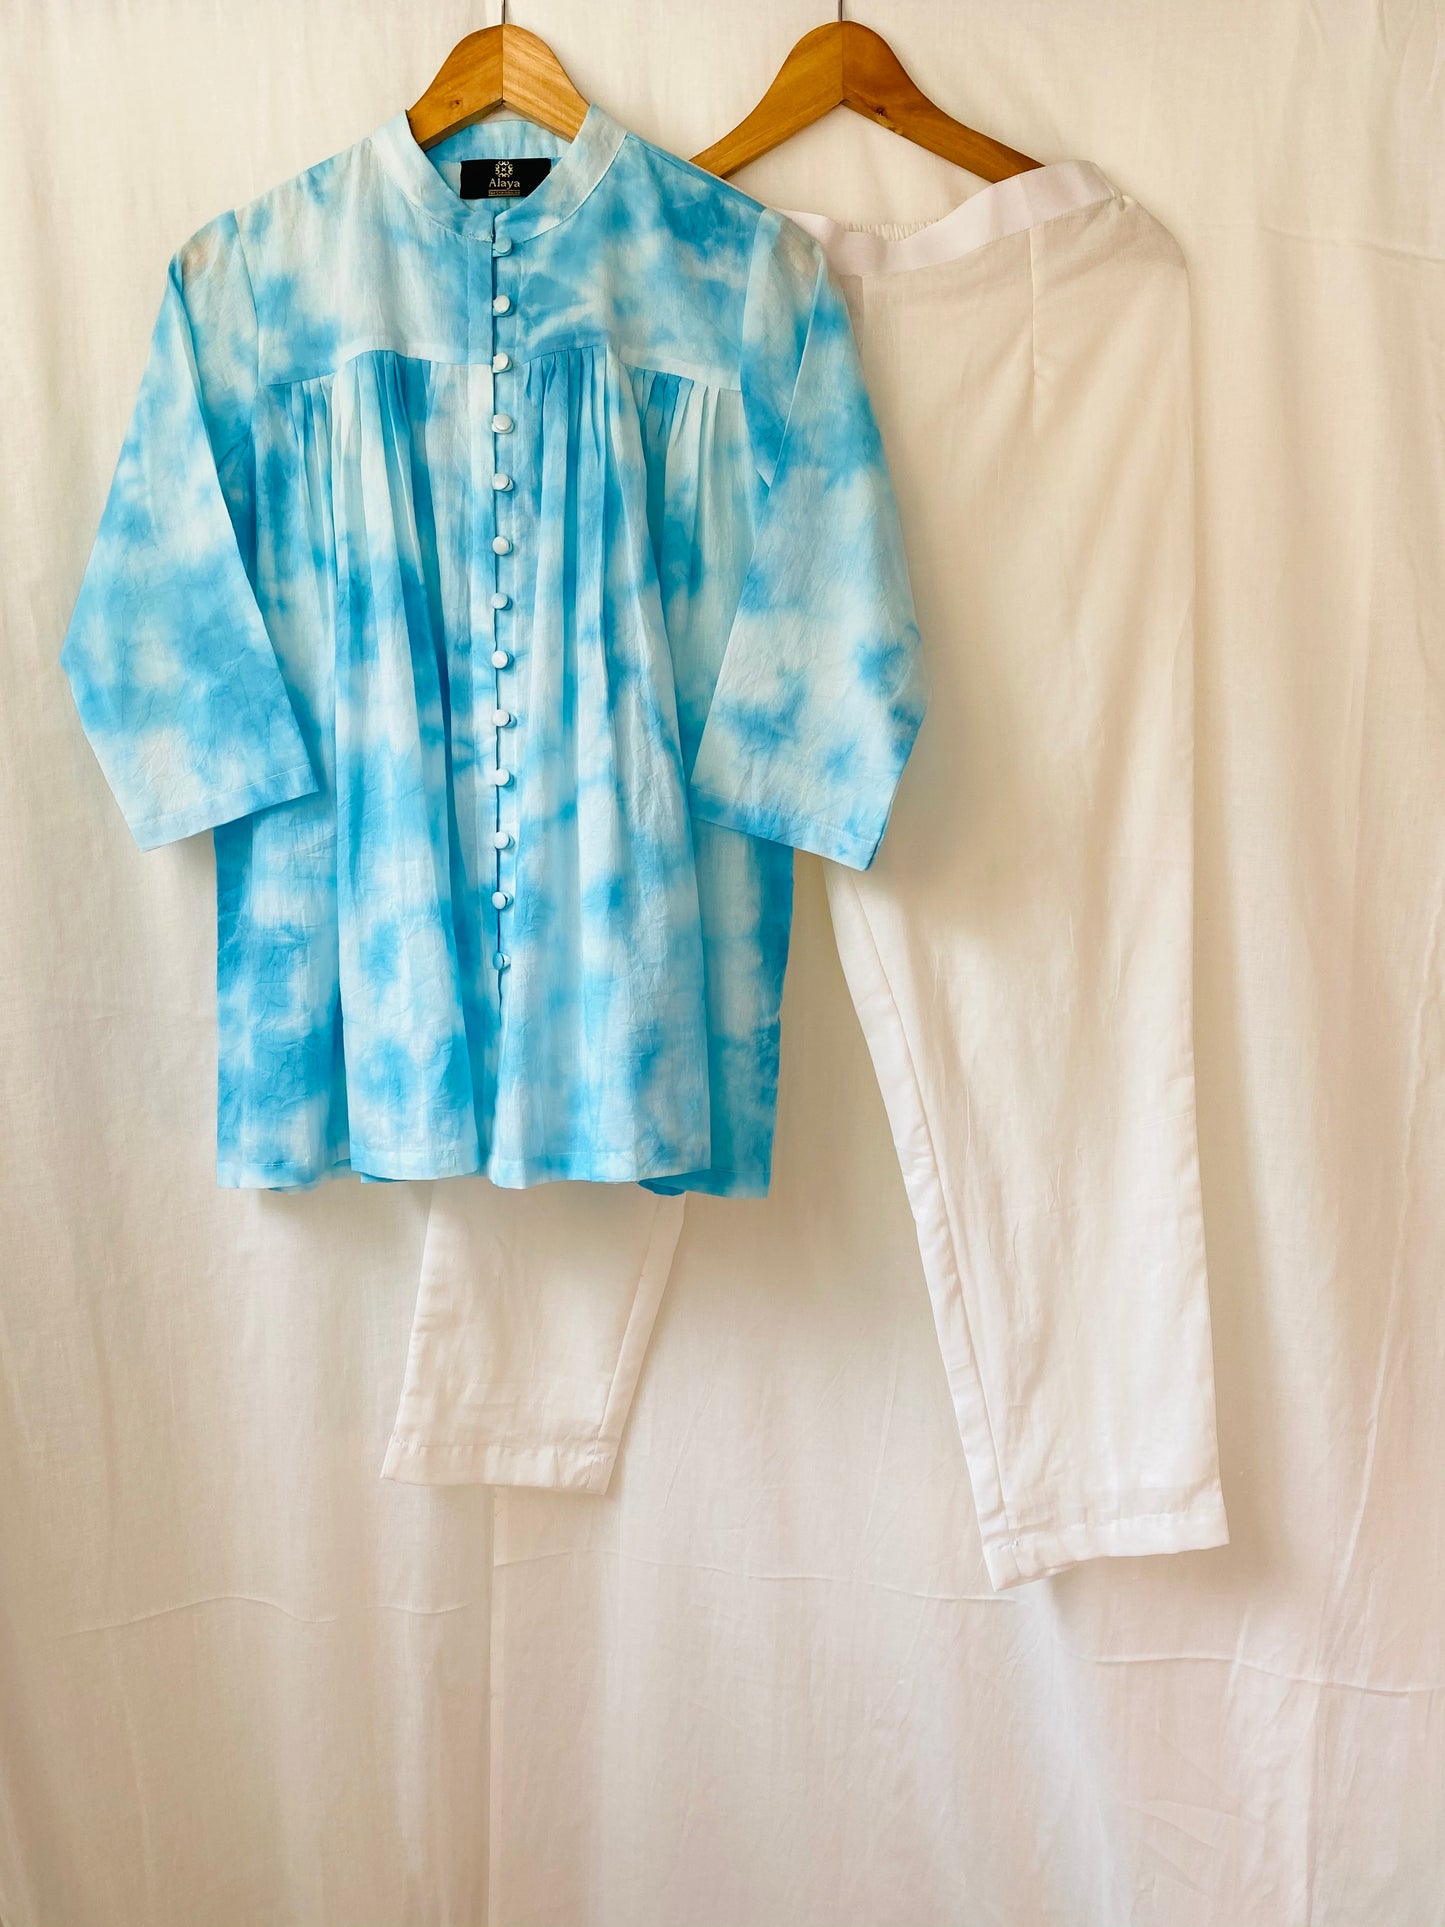 Blue Tie Dye Top with solid White Pants